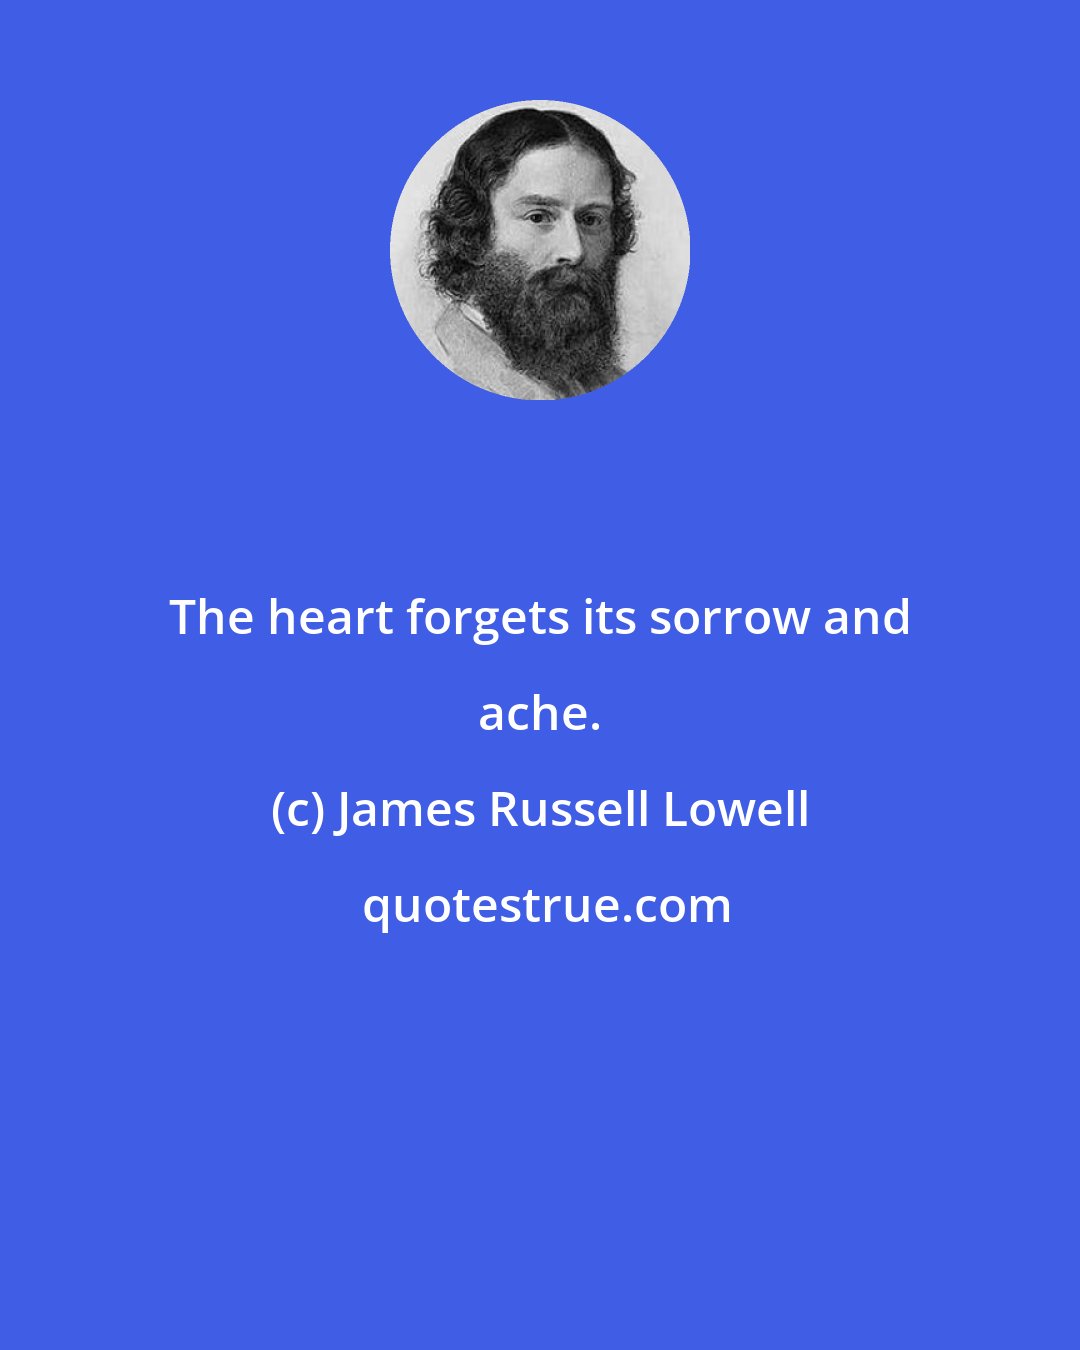 James Russell Lowell: The heart forgets its sorrow and ache.